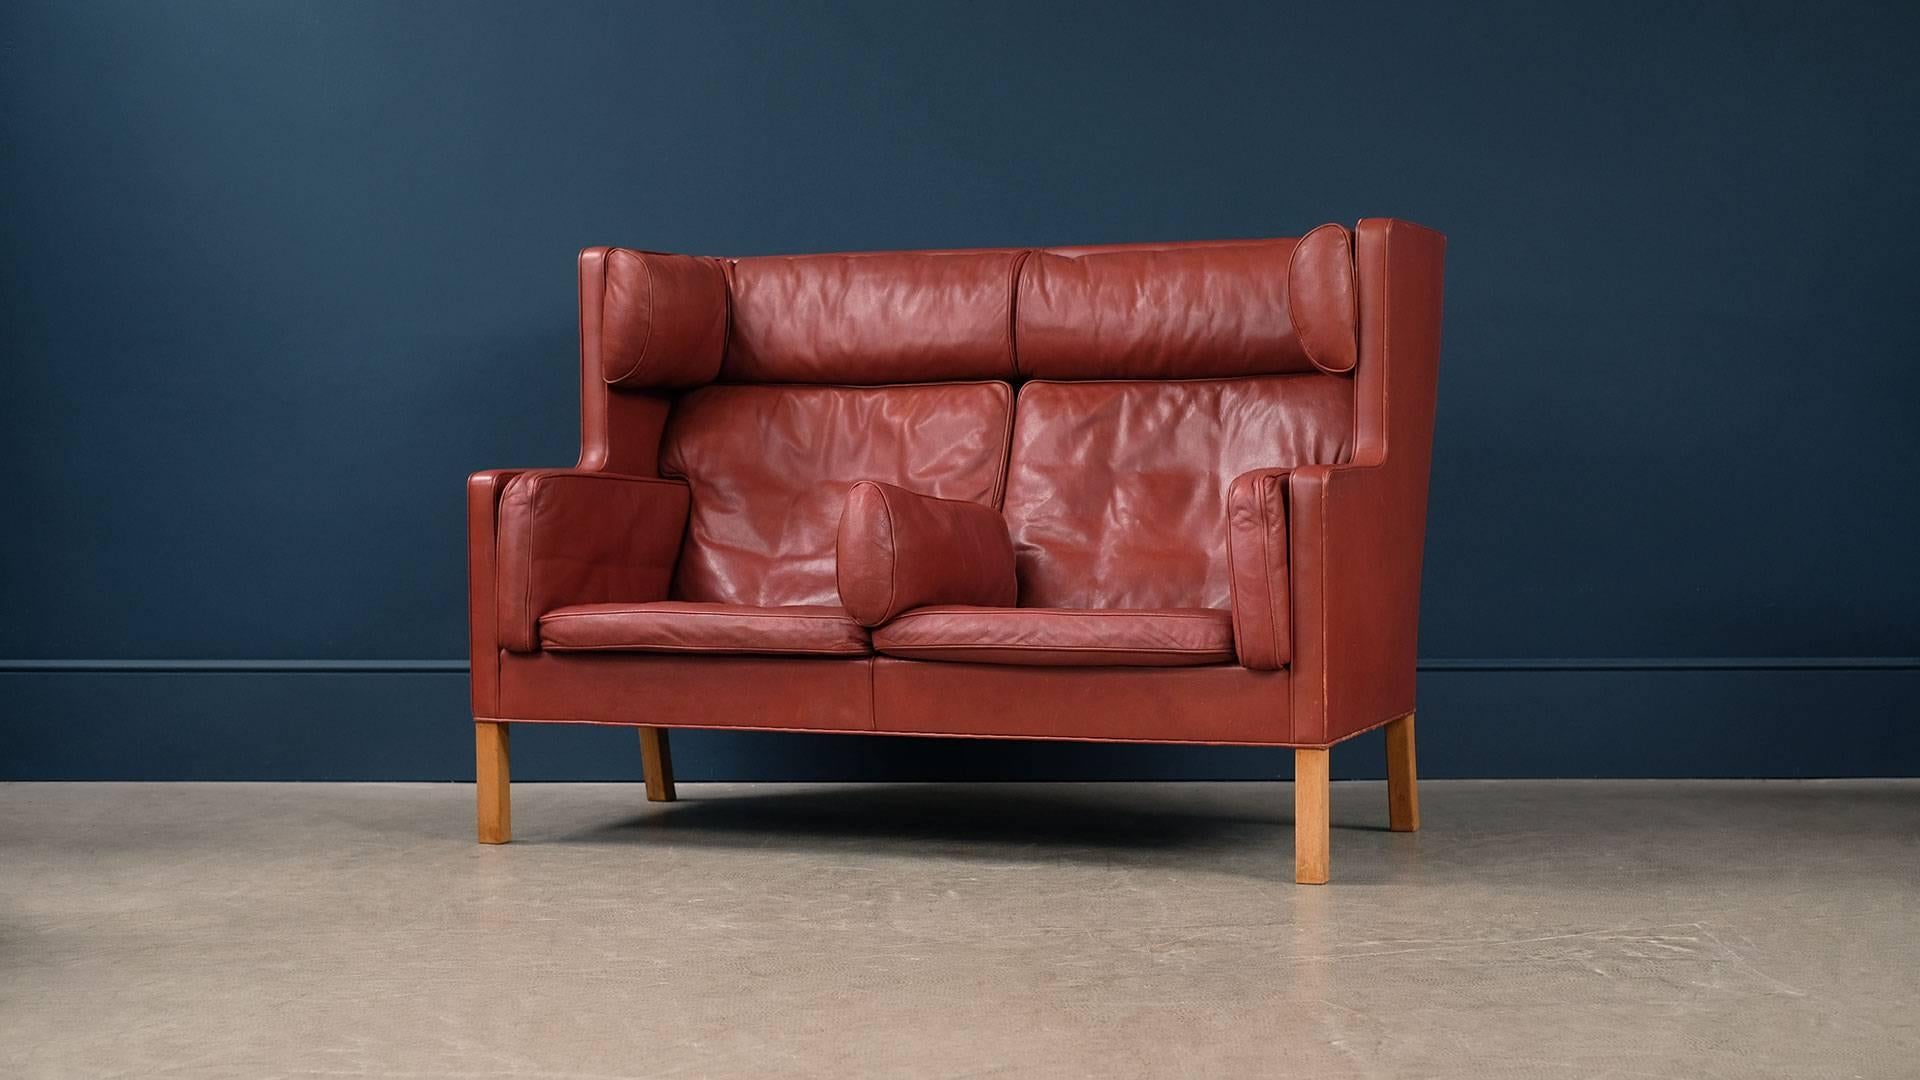 Amazing two-seat coupe sofa model 2192 designed by Børge Mogensen for Fredericia, Denmark. Unsurpassed quality in beautiful patinated thick red / brown leather with solid oak legs. Wonderful and rare sofa.